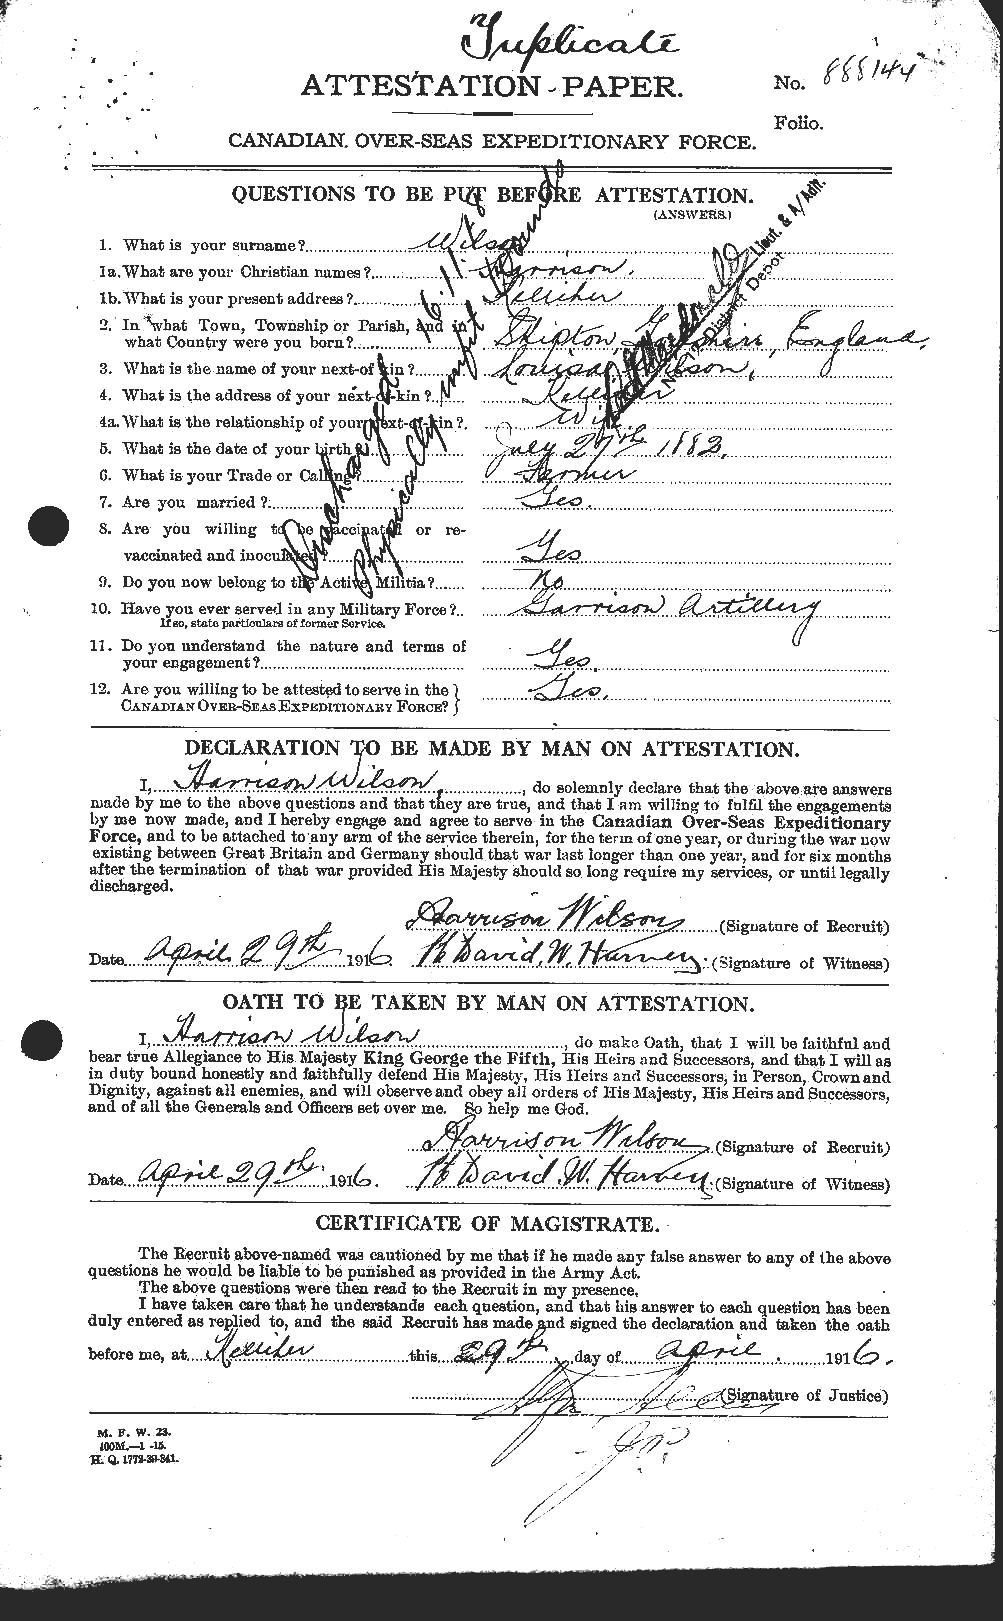 Personnel Records of the First World War - CEF 679422a